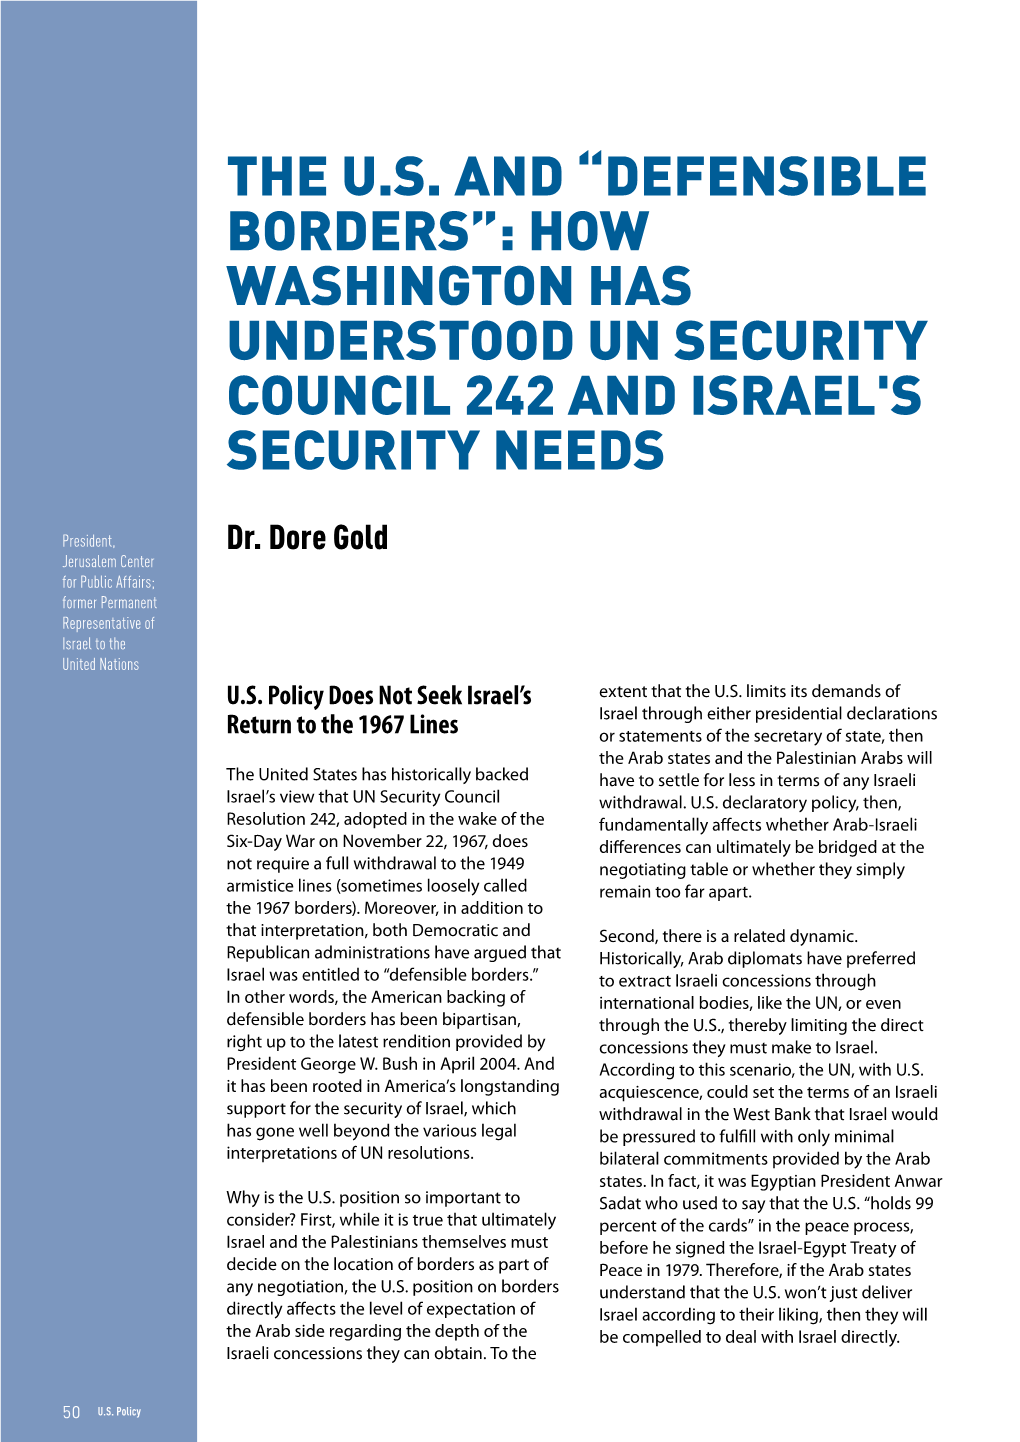 Defensible Borders”: How Washington Has Understood Un Security Council 242 and Israel's Security Needs